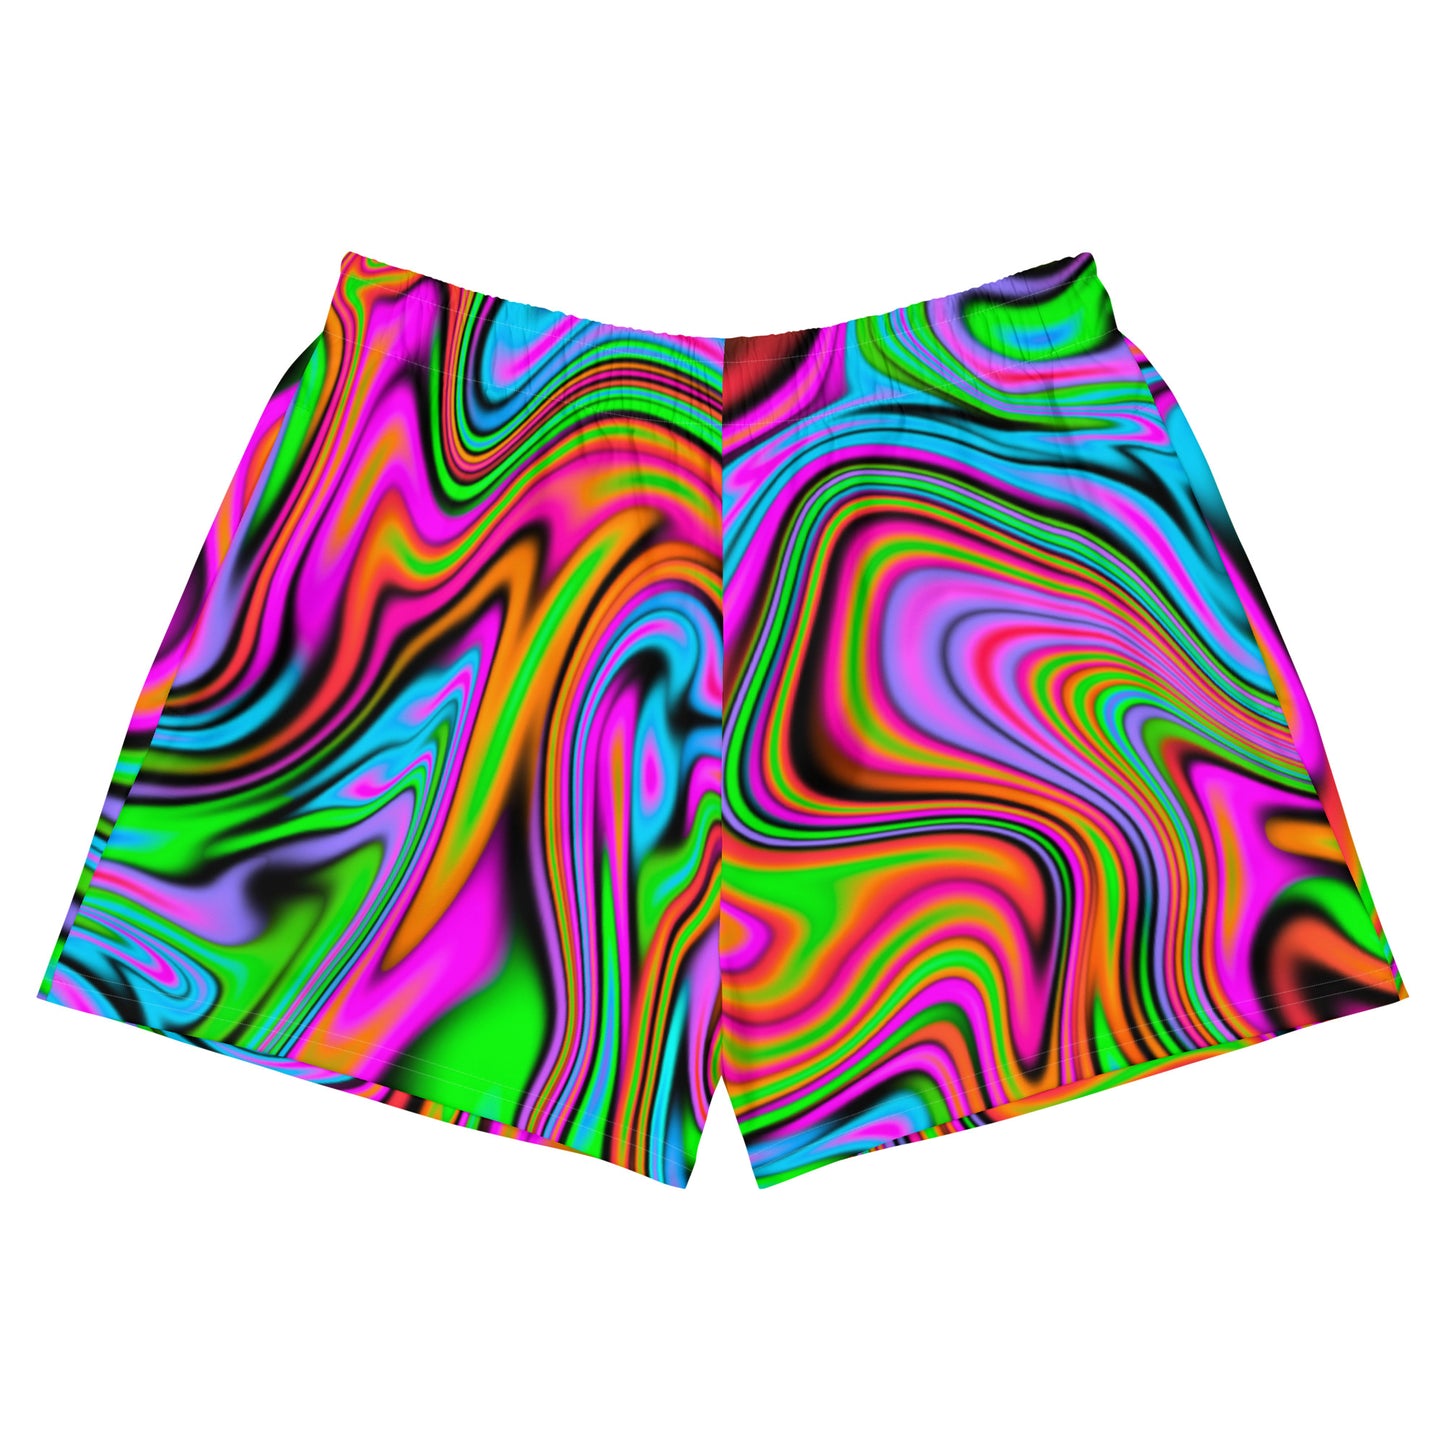 Spread Kindness Recycled Athletic Shorts